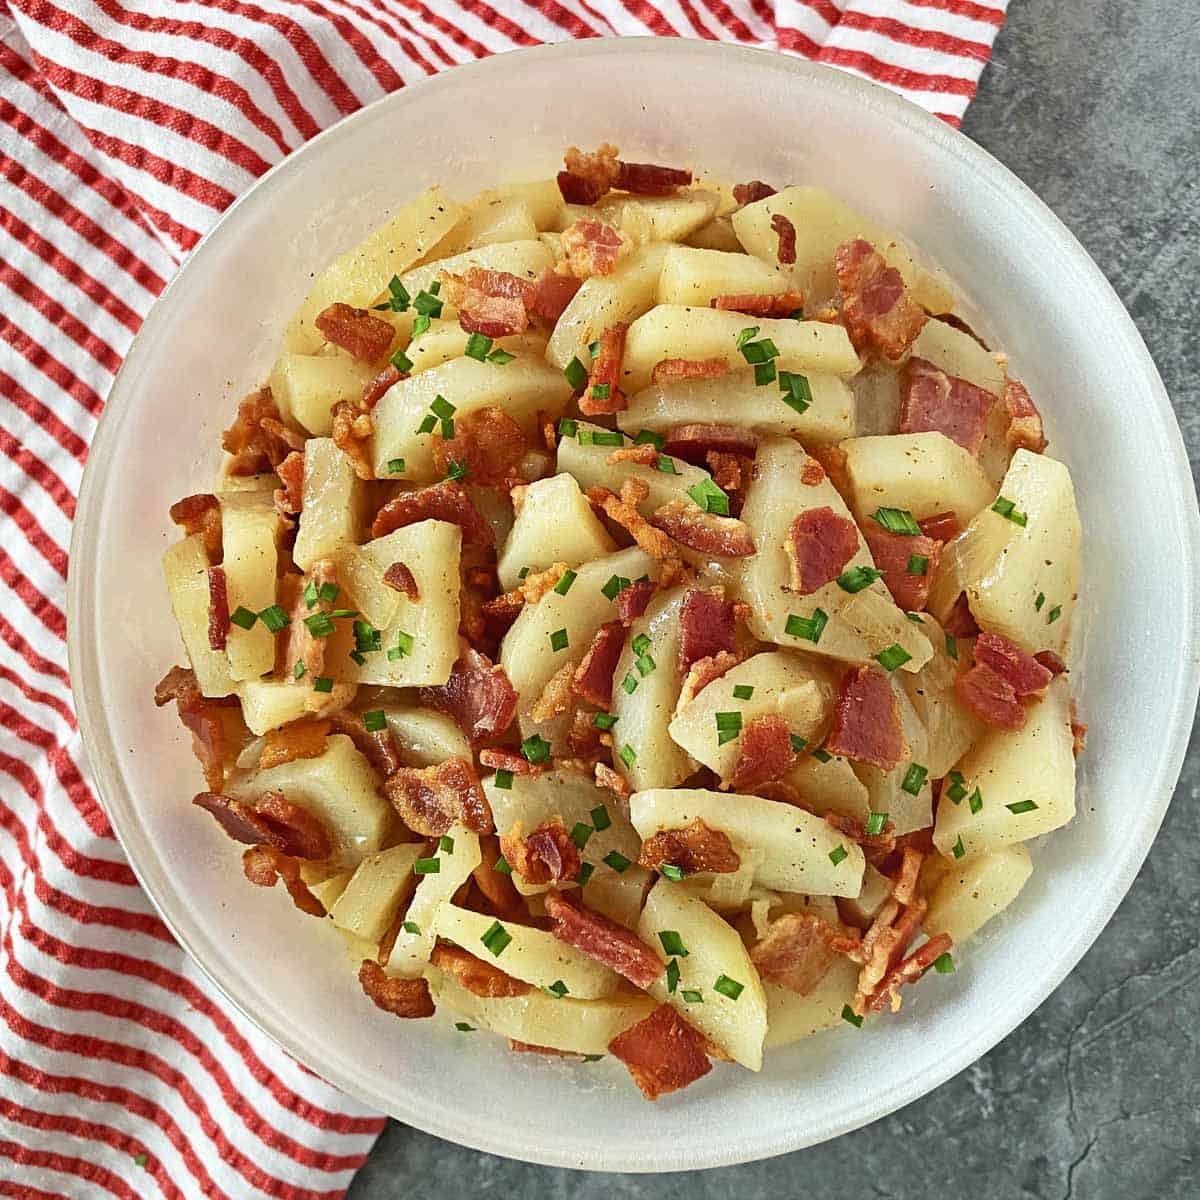 Warm potato salad with bacon garnished with chives in a white bowl on a read and white striped napkin.